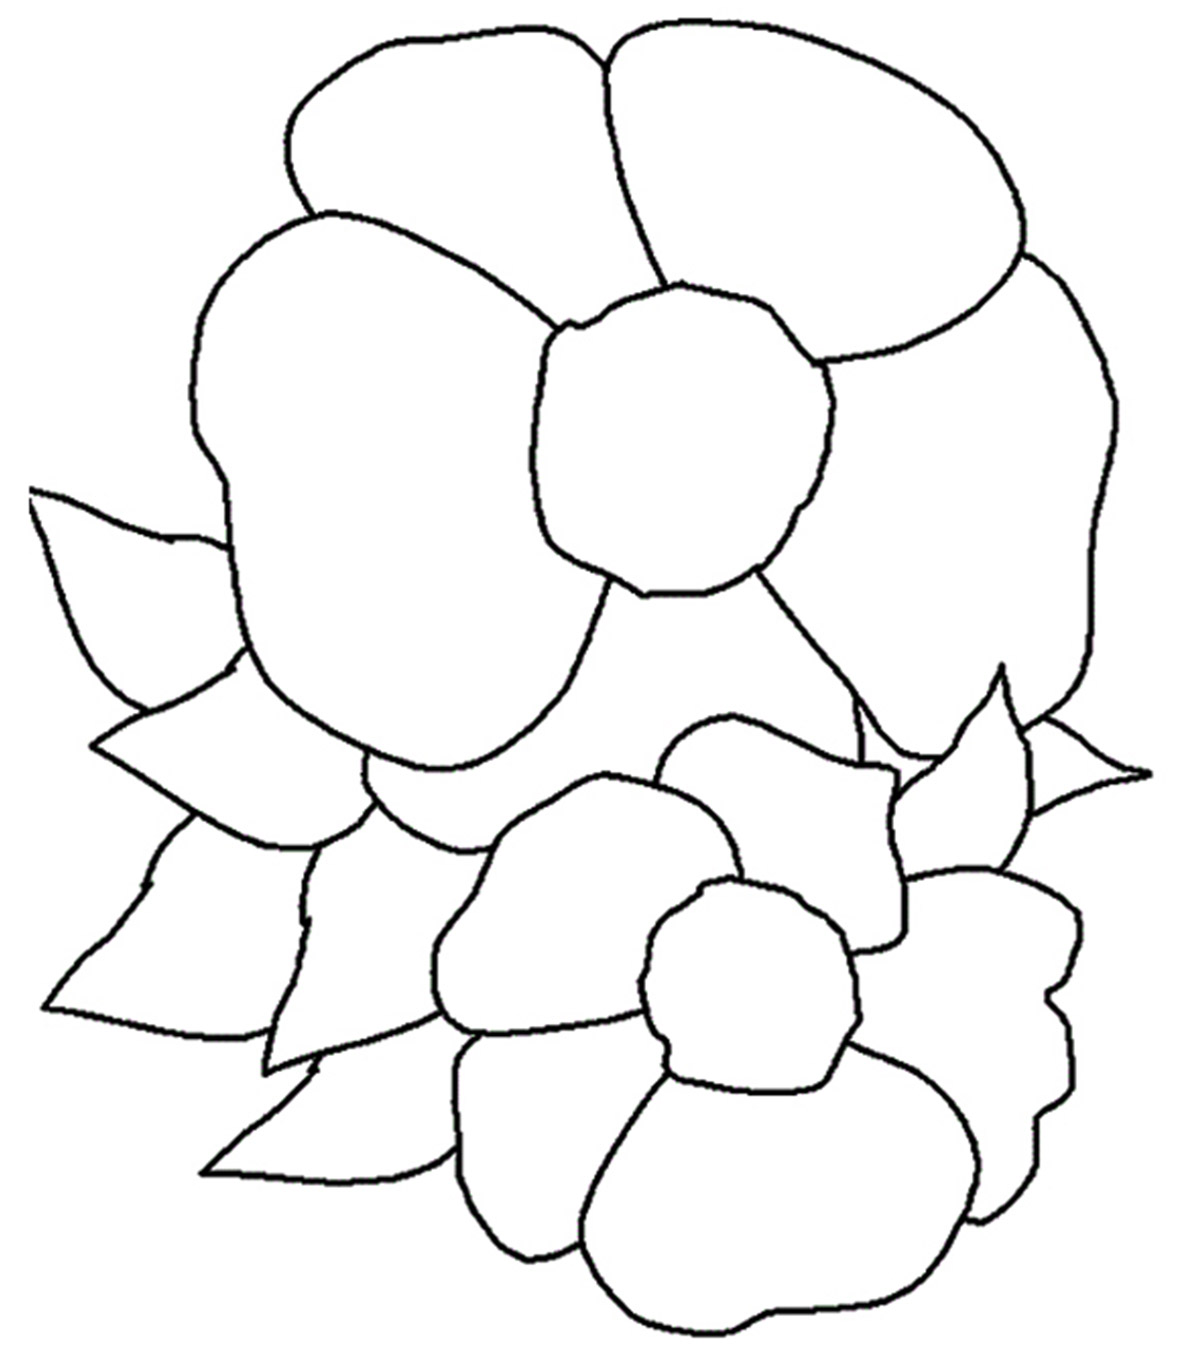 beautiful rose coloring pages